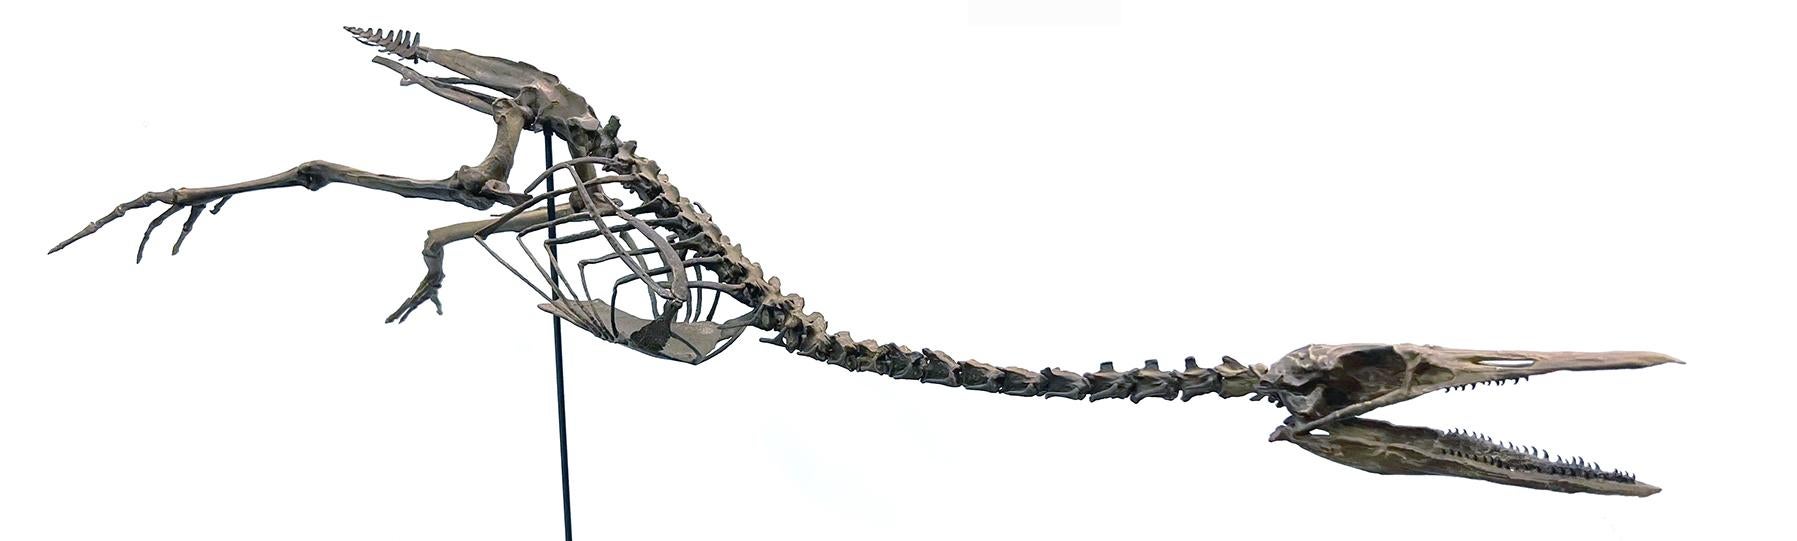 Full length skeleton of a prehistoric creature with a long, elongated body, two short legs and a thin, alligator like head.